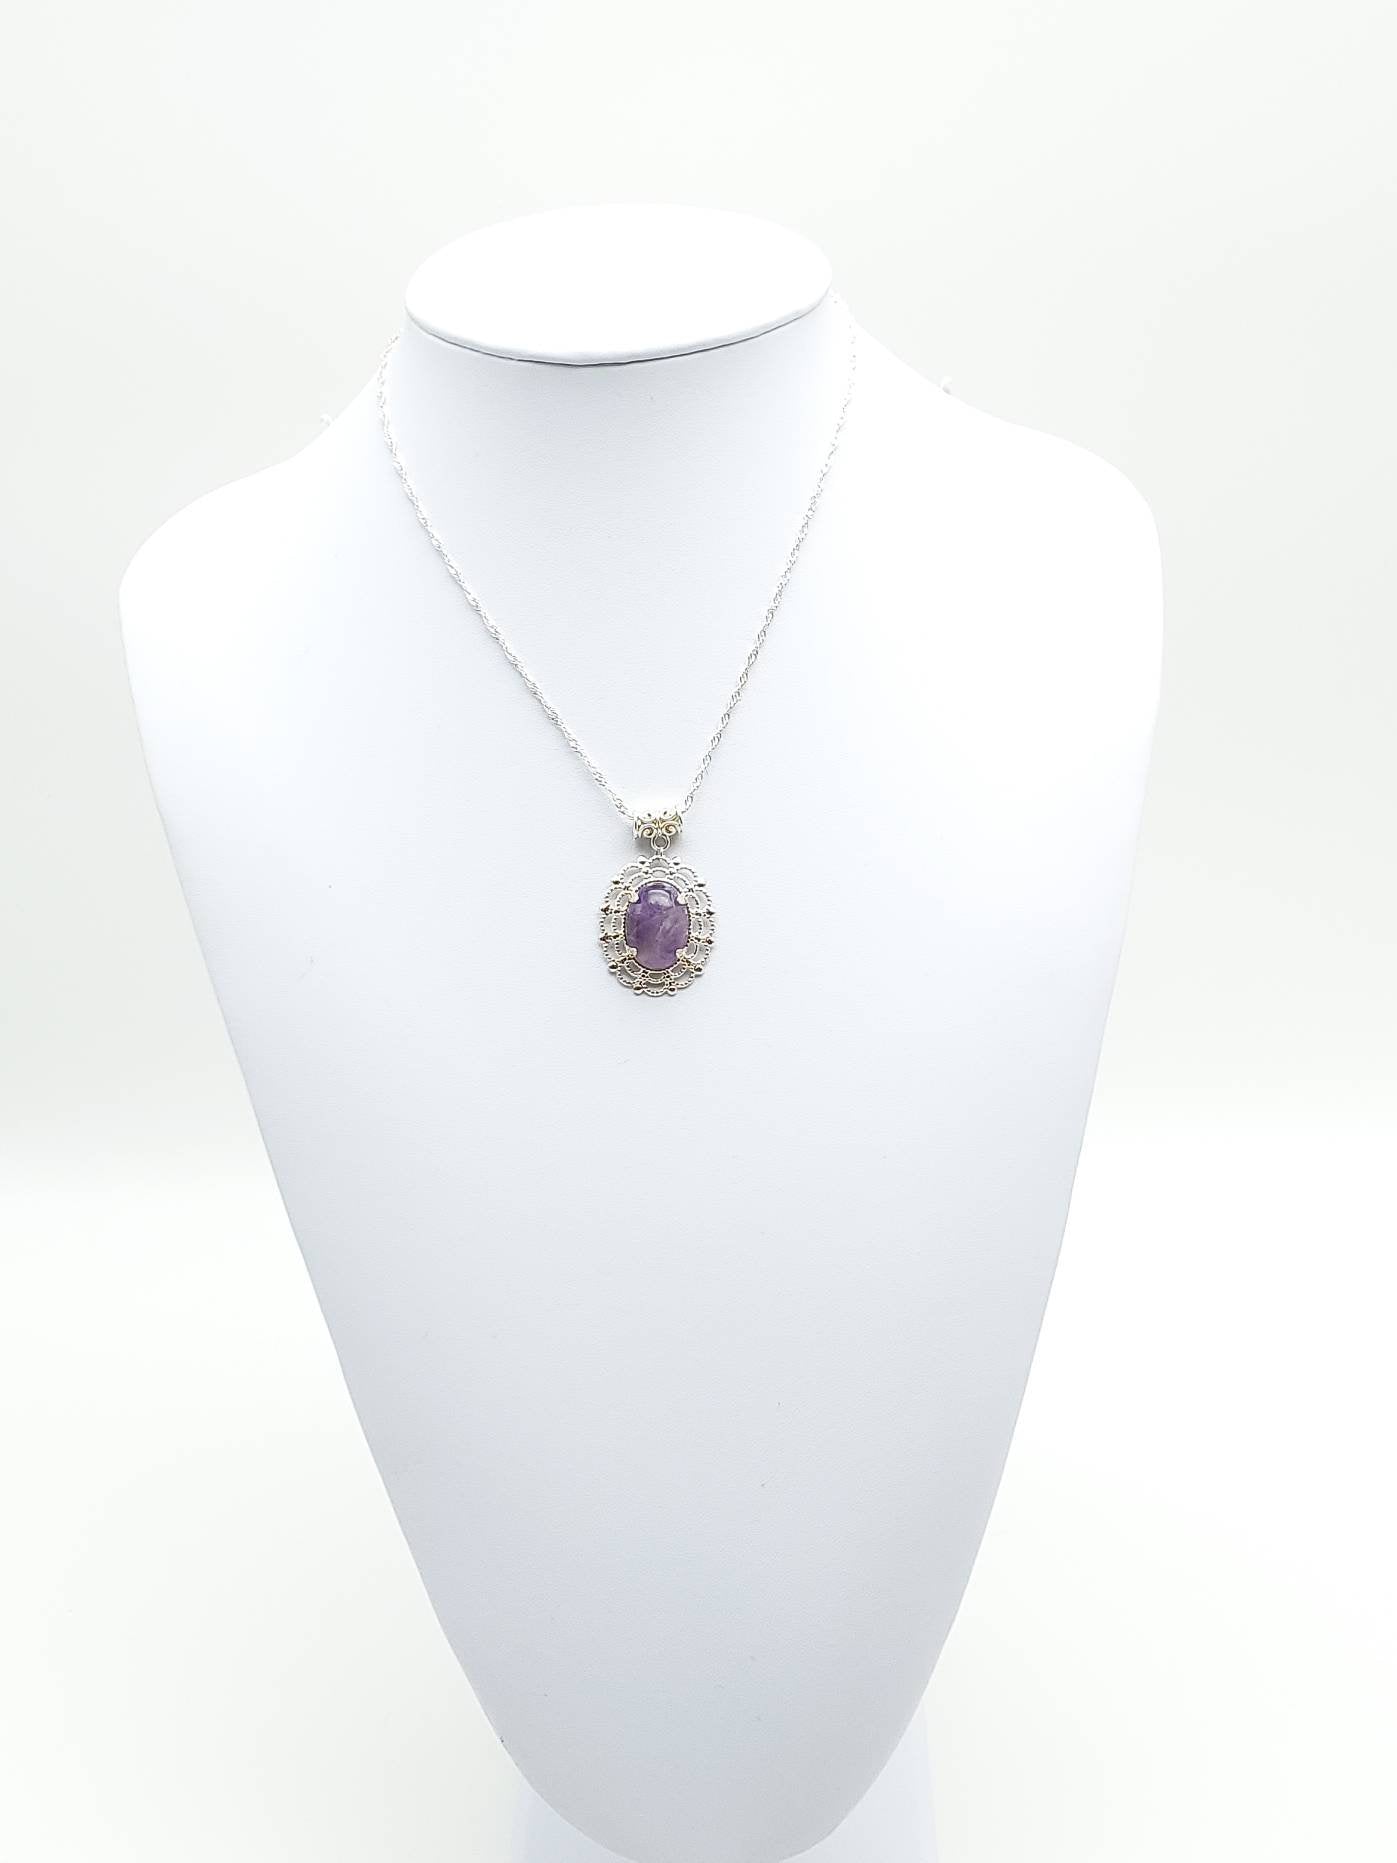 Amethyst Cabochon Pendant Necklace - The Caffeinated Raven